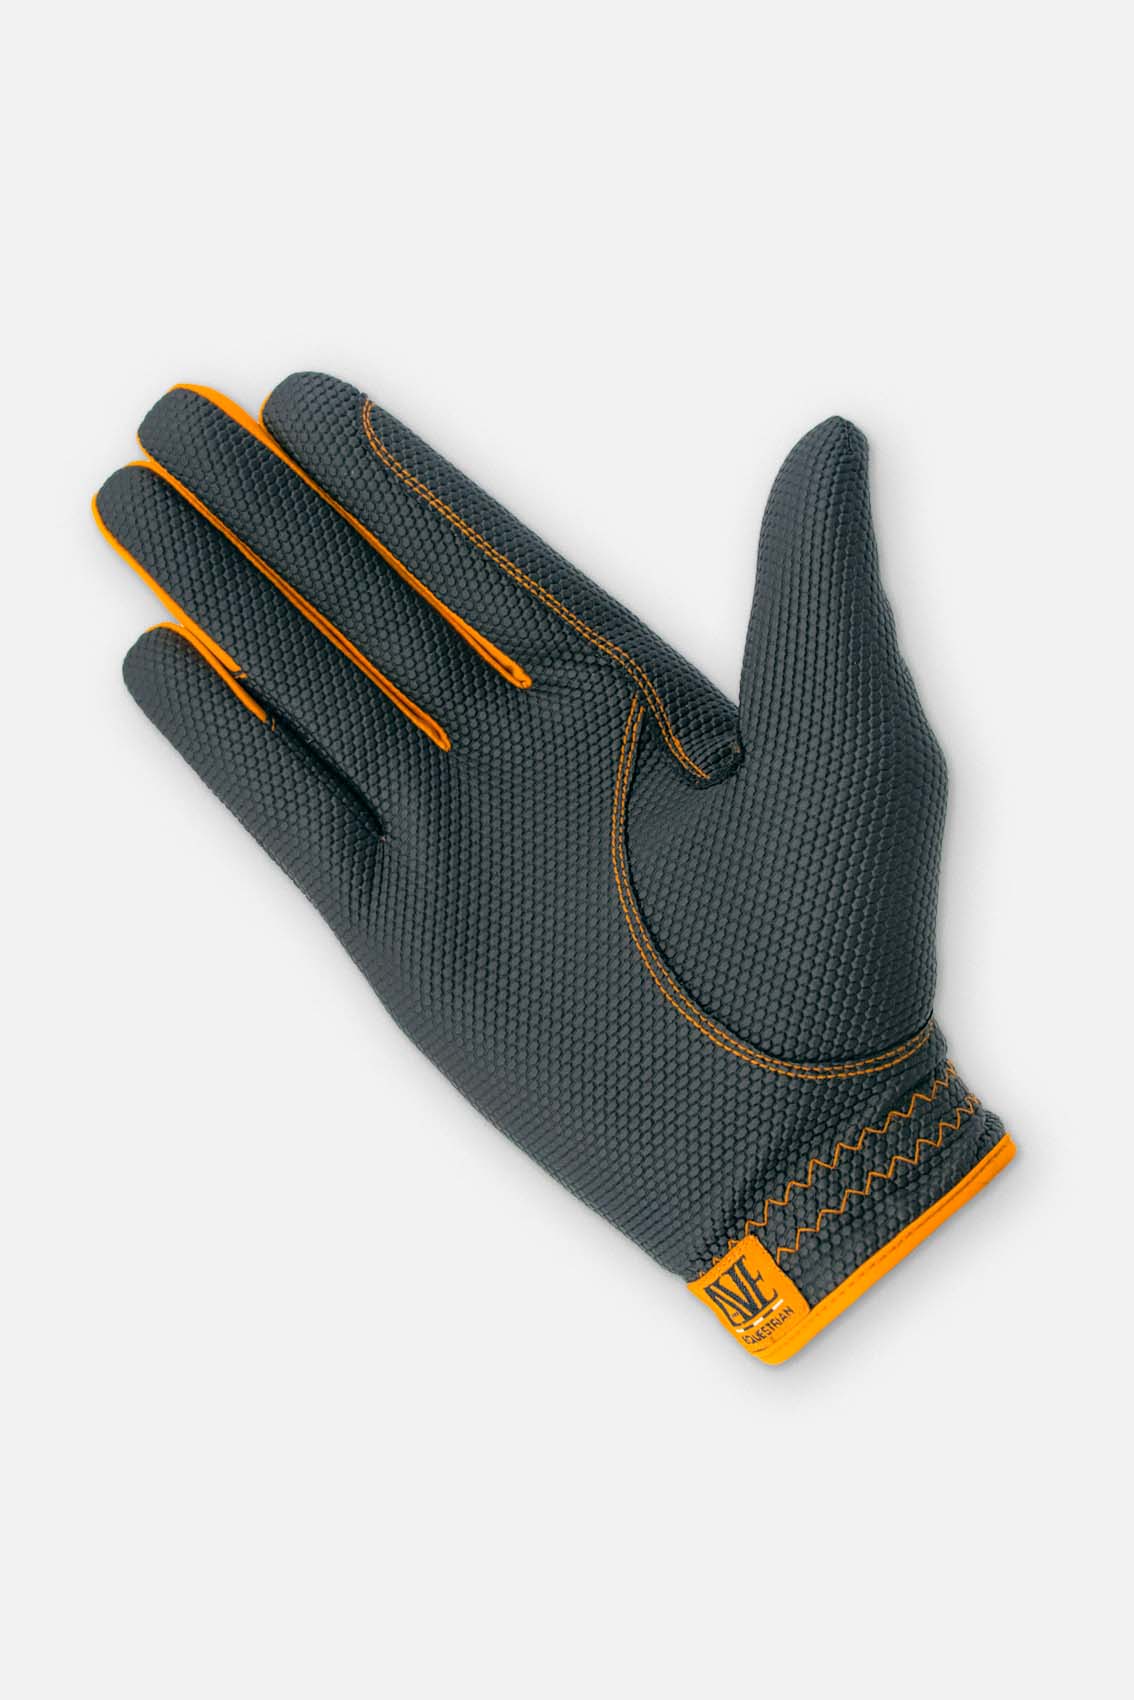 Women's riding gloves made of PU-leather with comfort stretch